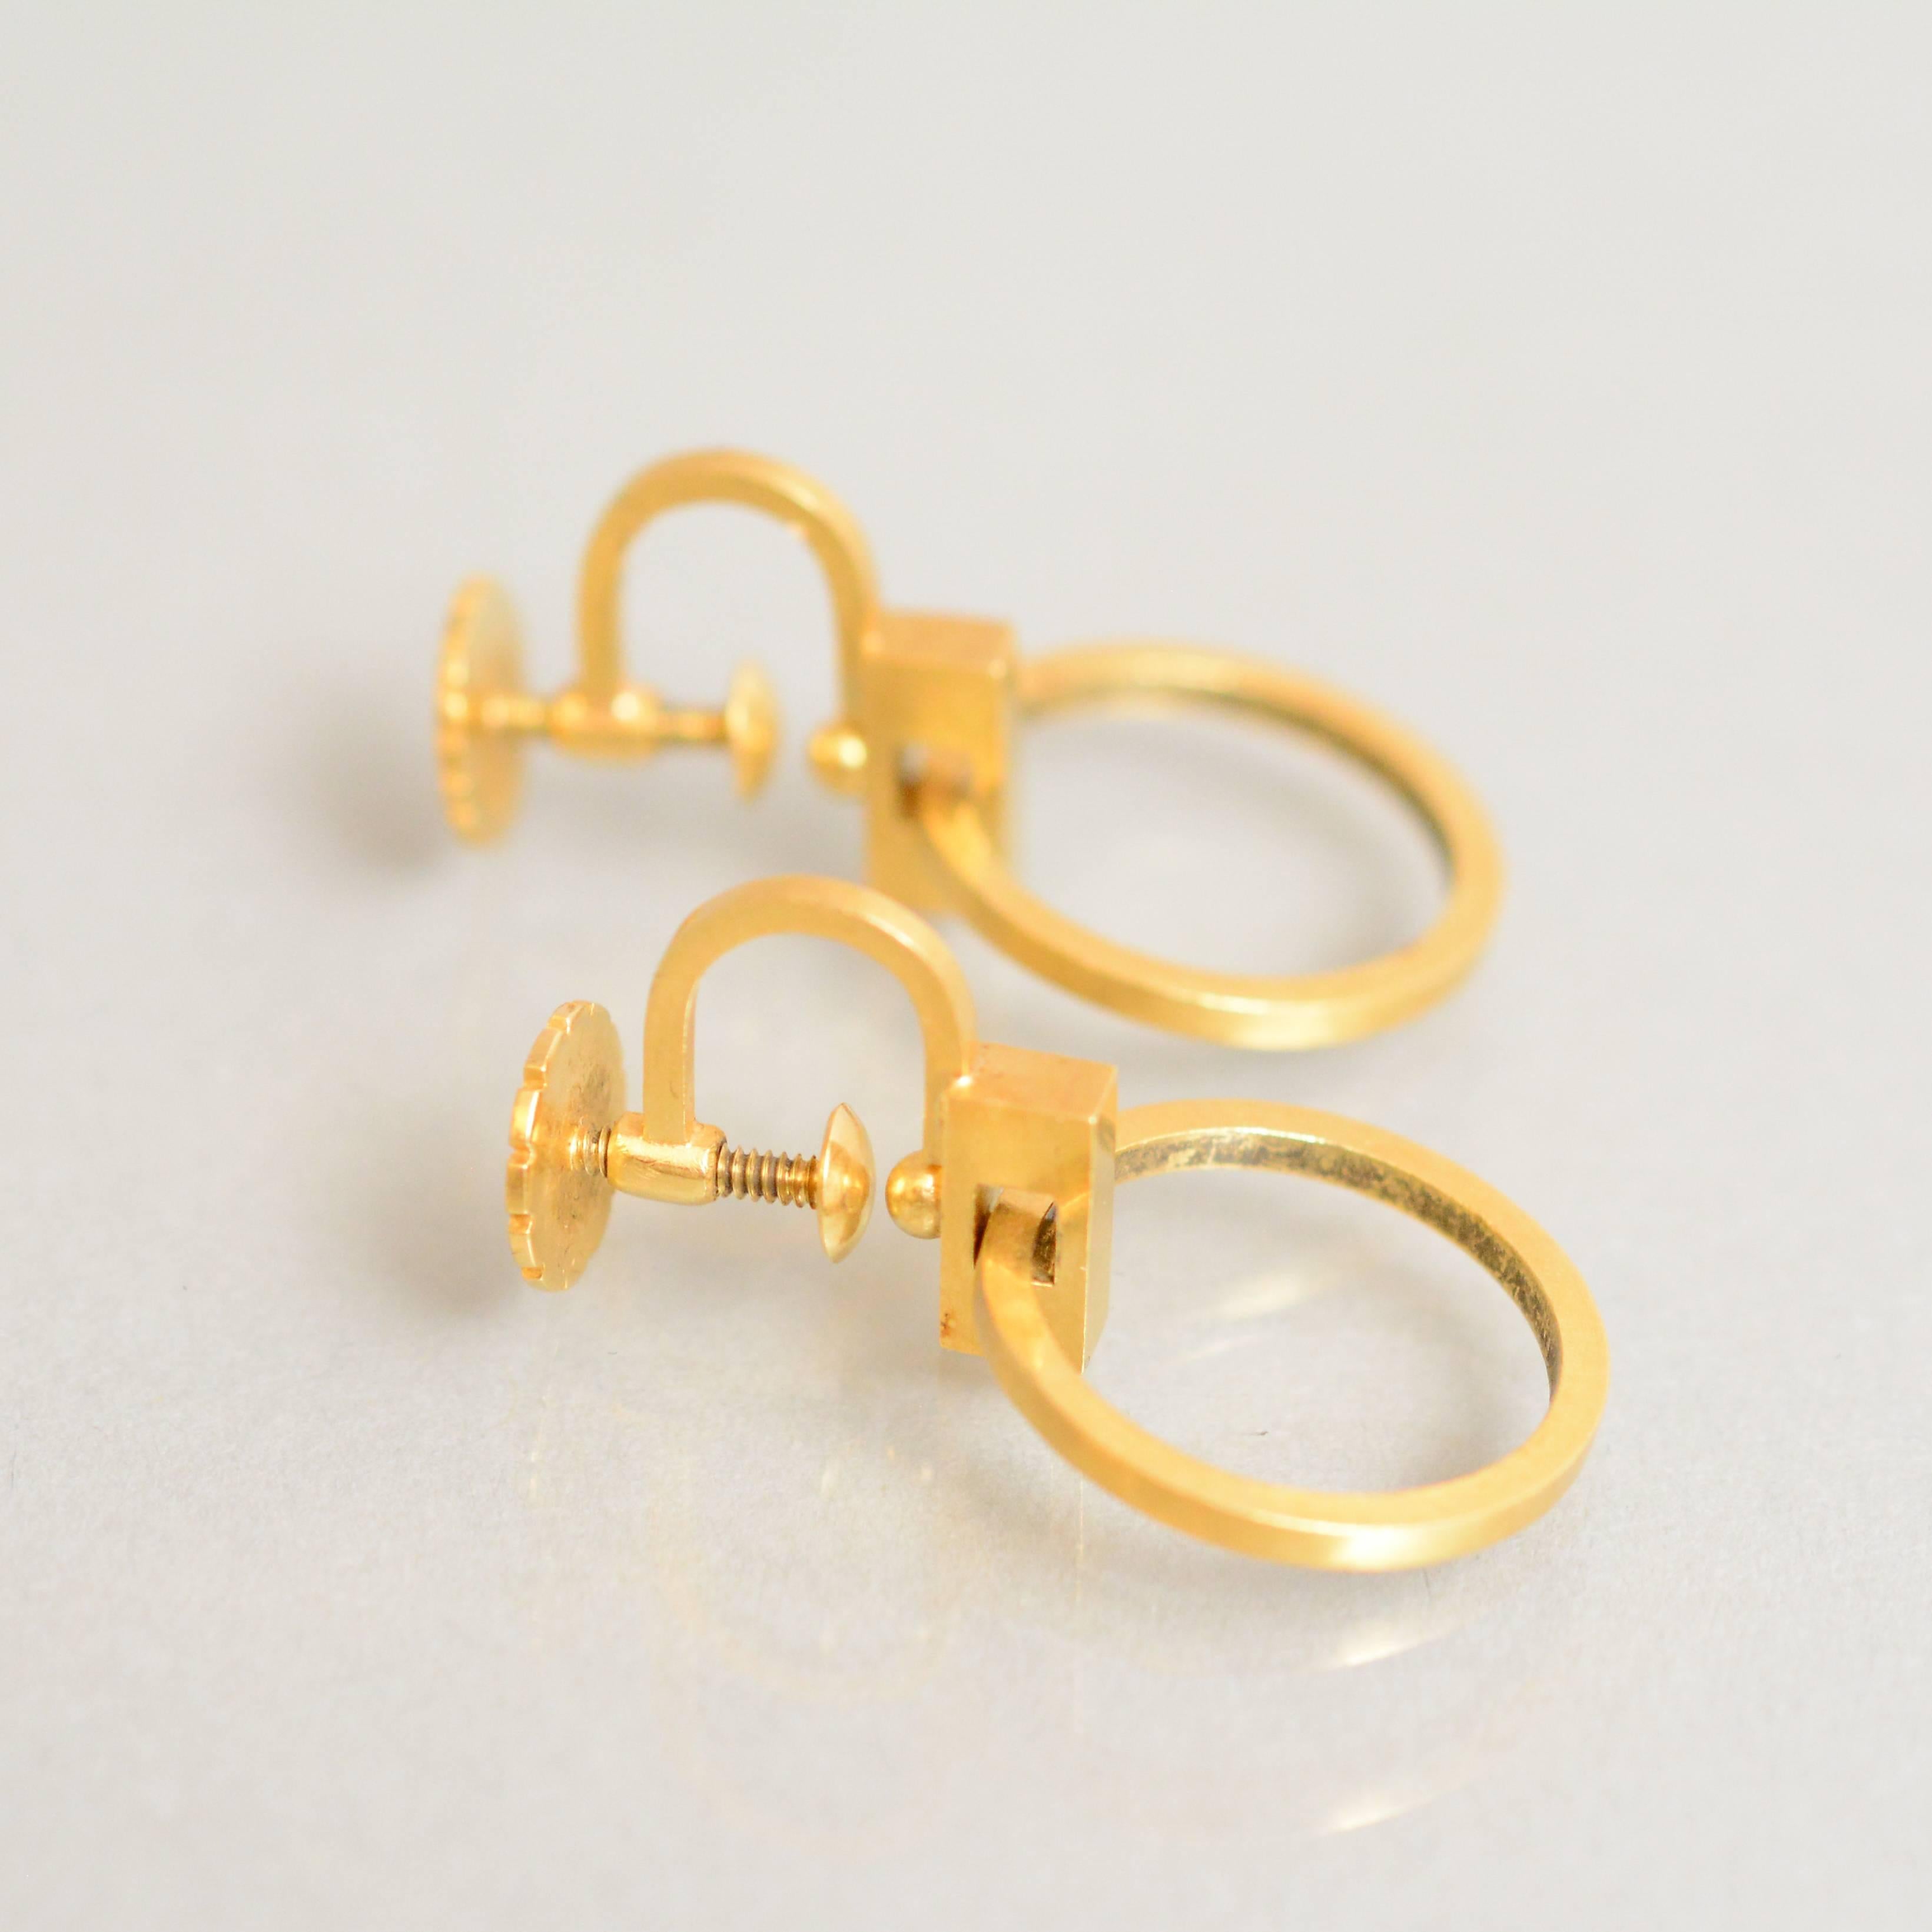 Geometrical 18-carat gold earrings by Wiwen Nilsson, Lund. Signed and dated E9 for 1955.